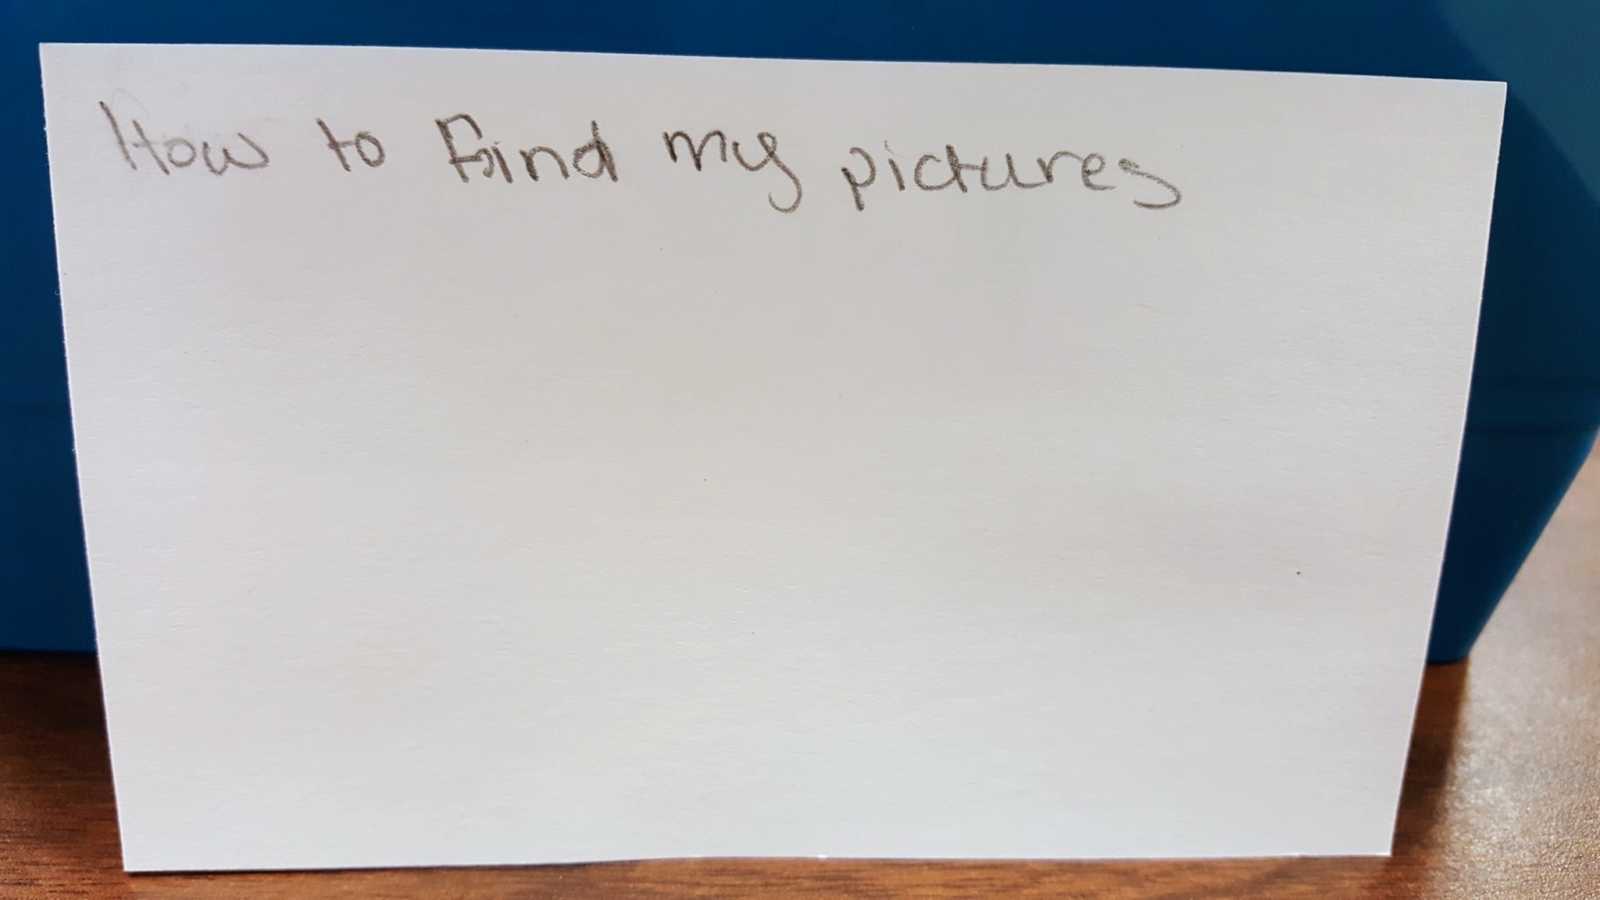 Piece of paper saying, "how to find my pictures" in regard to parents seeing children's social media